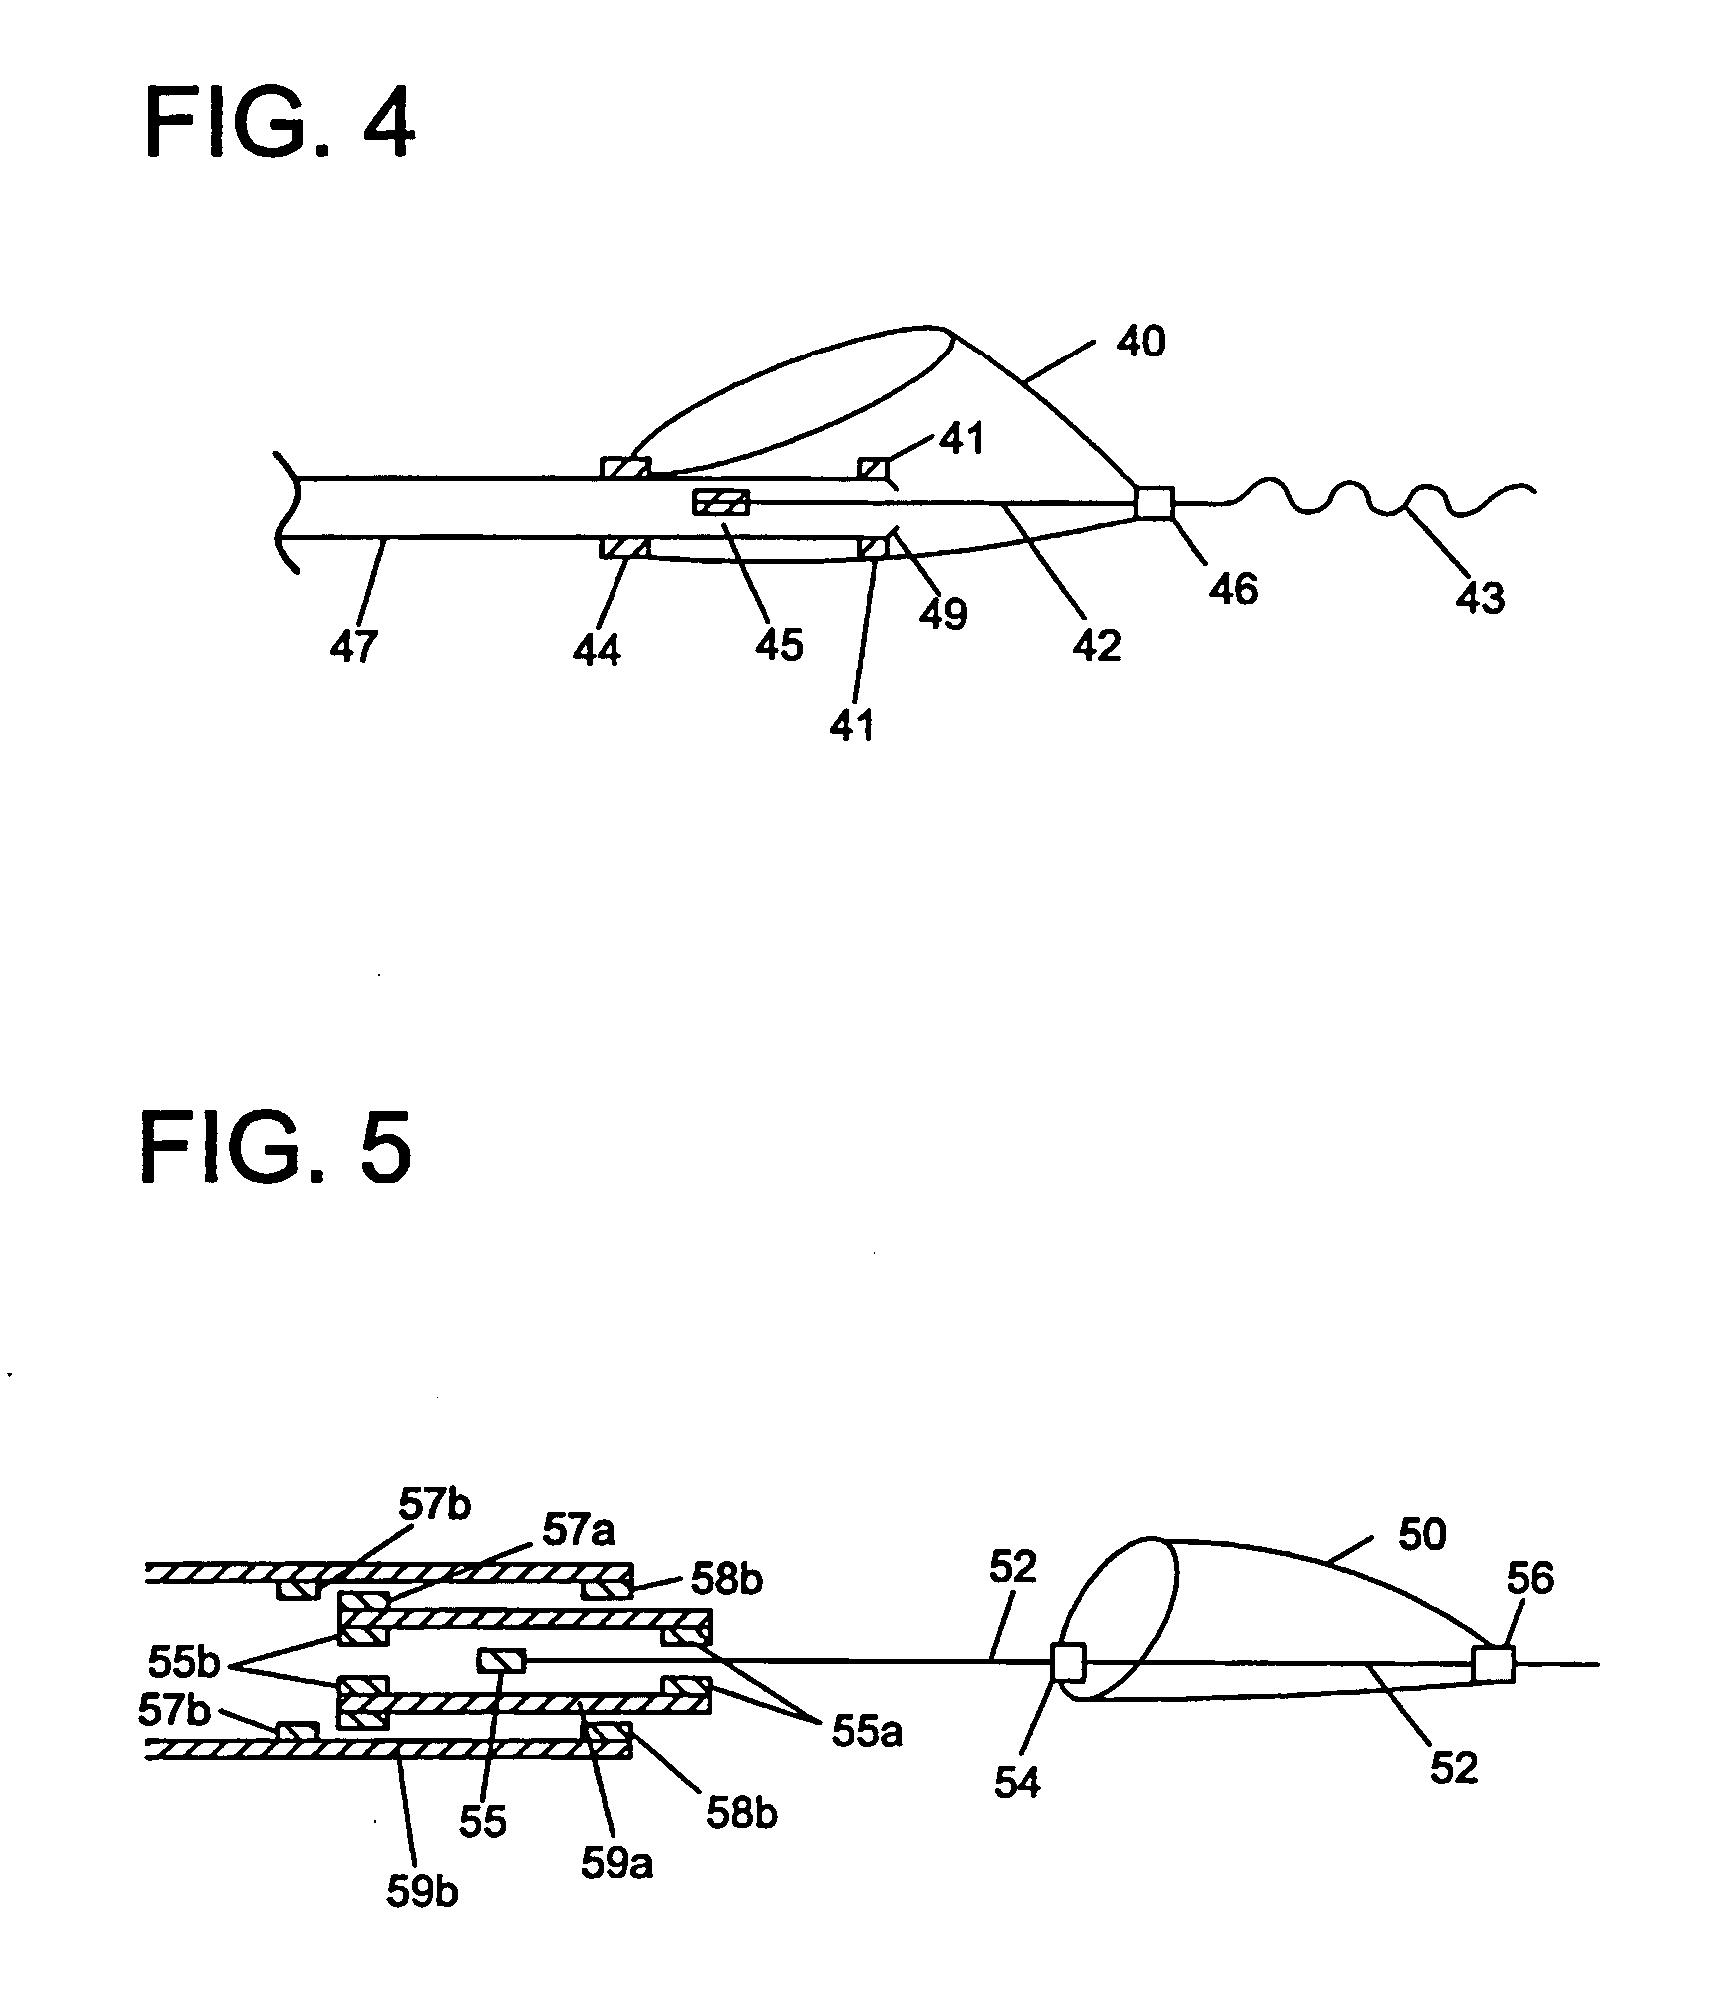 Distal protection devices having controllable wire motion